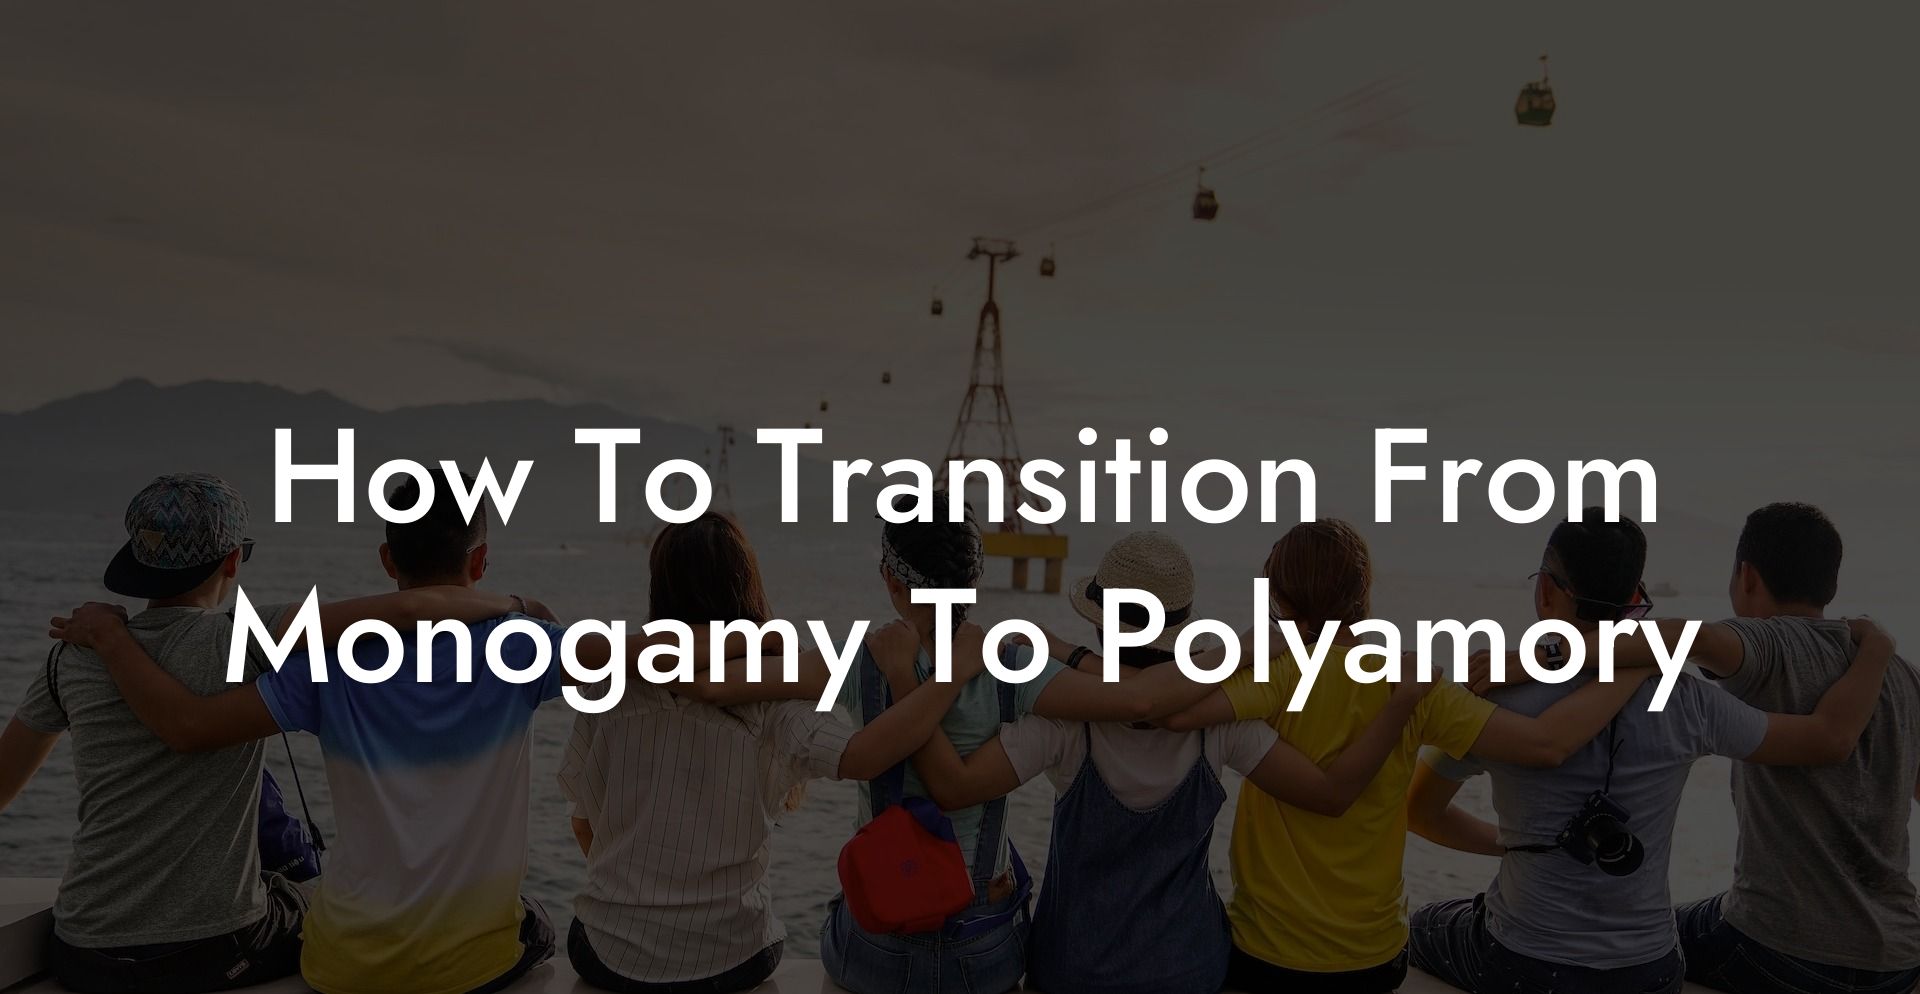 How To Transition From Monogamy To Polyamory